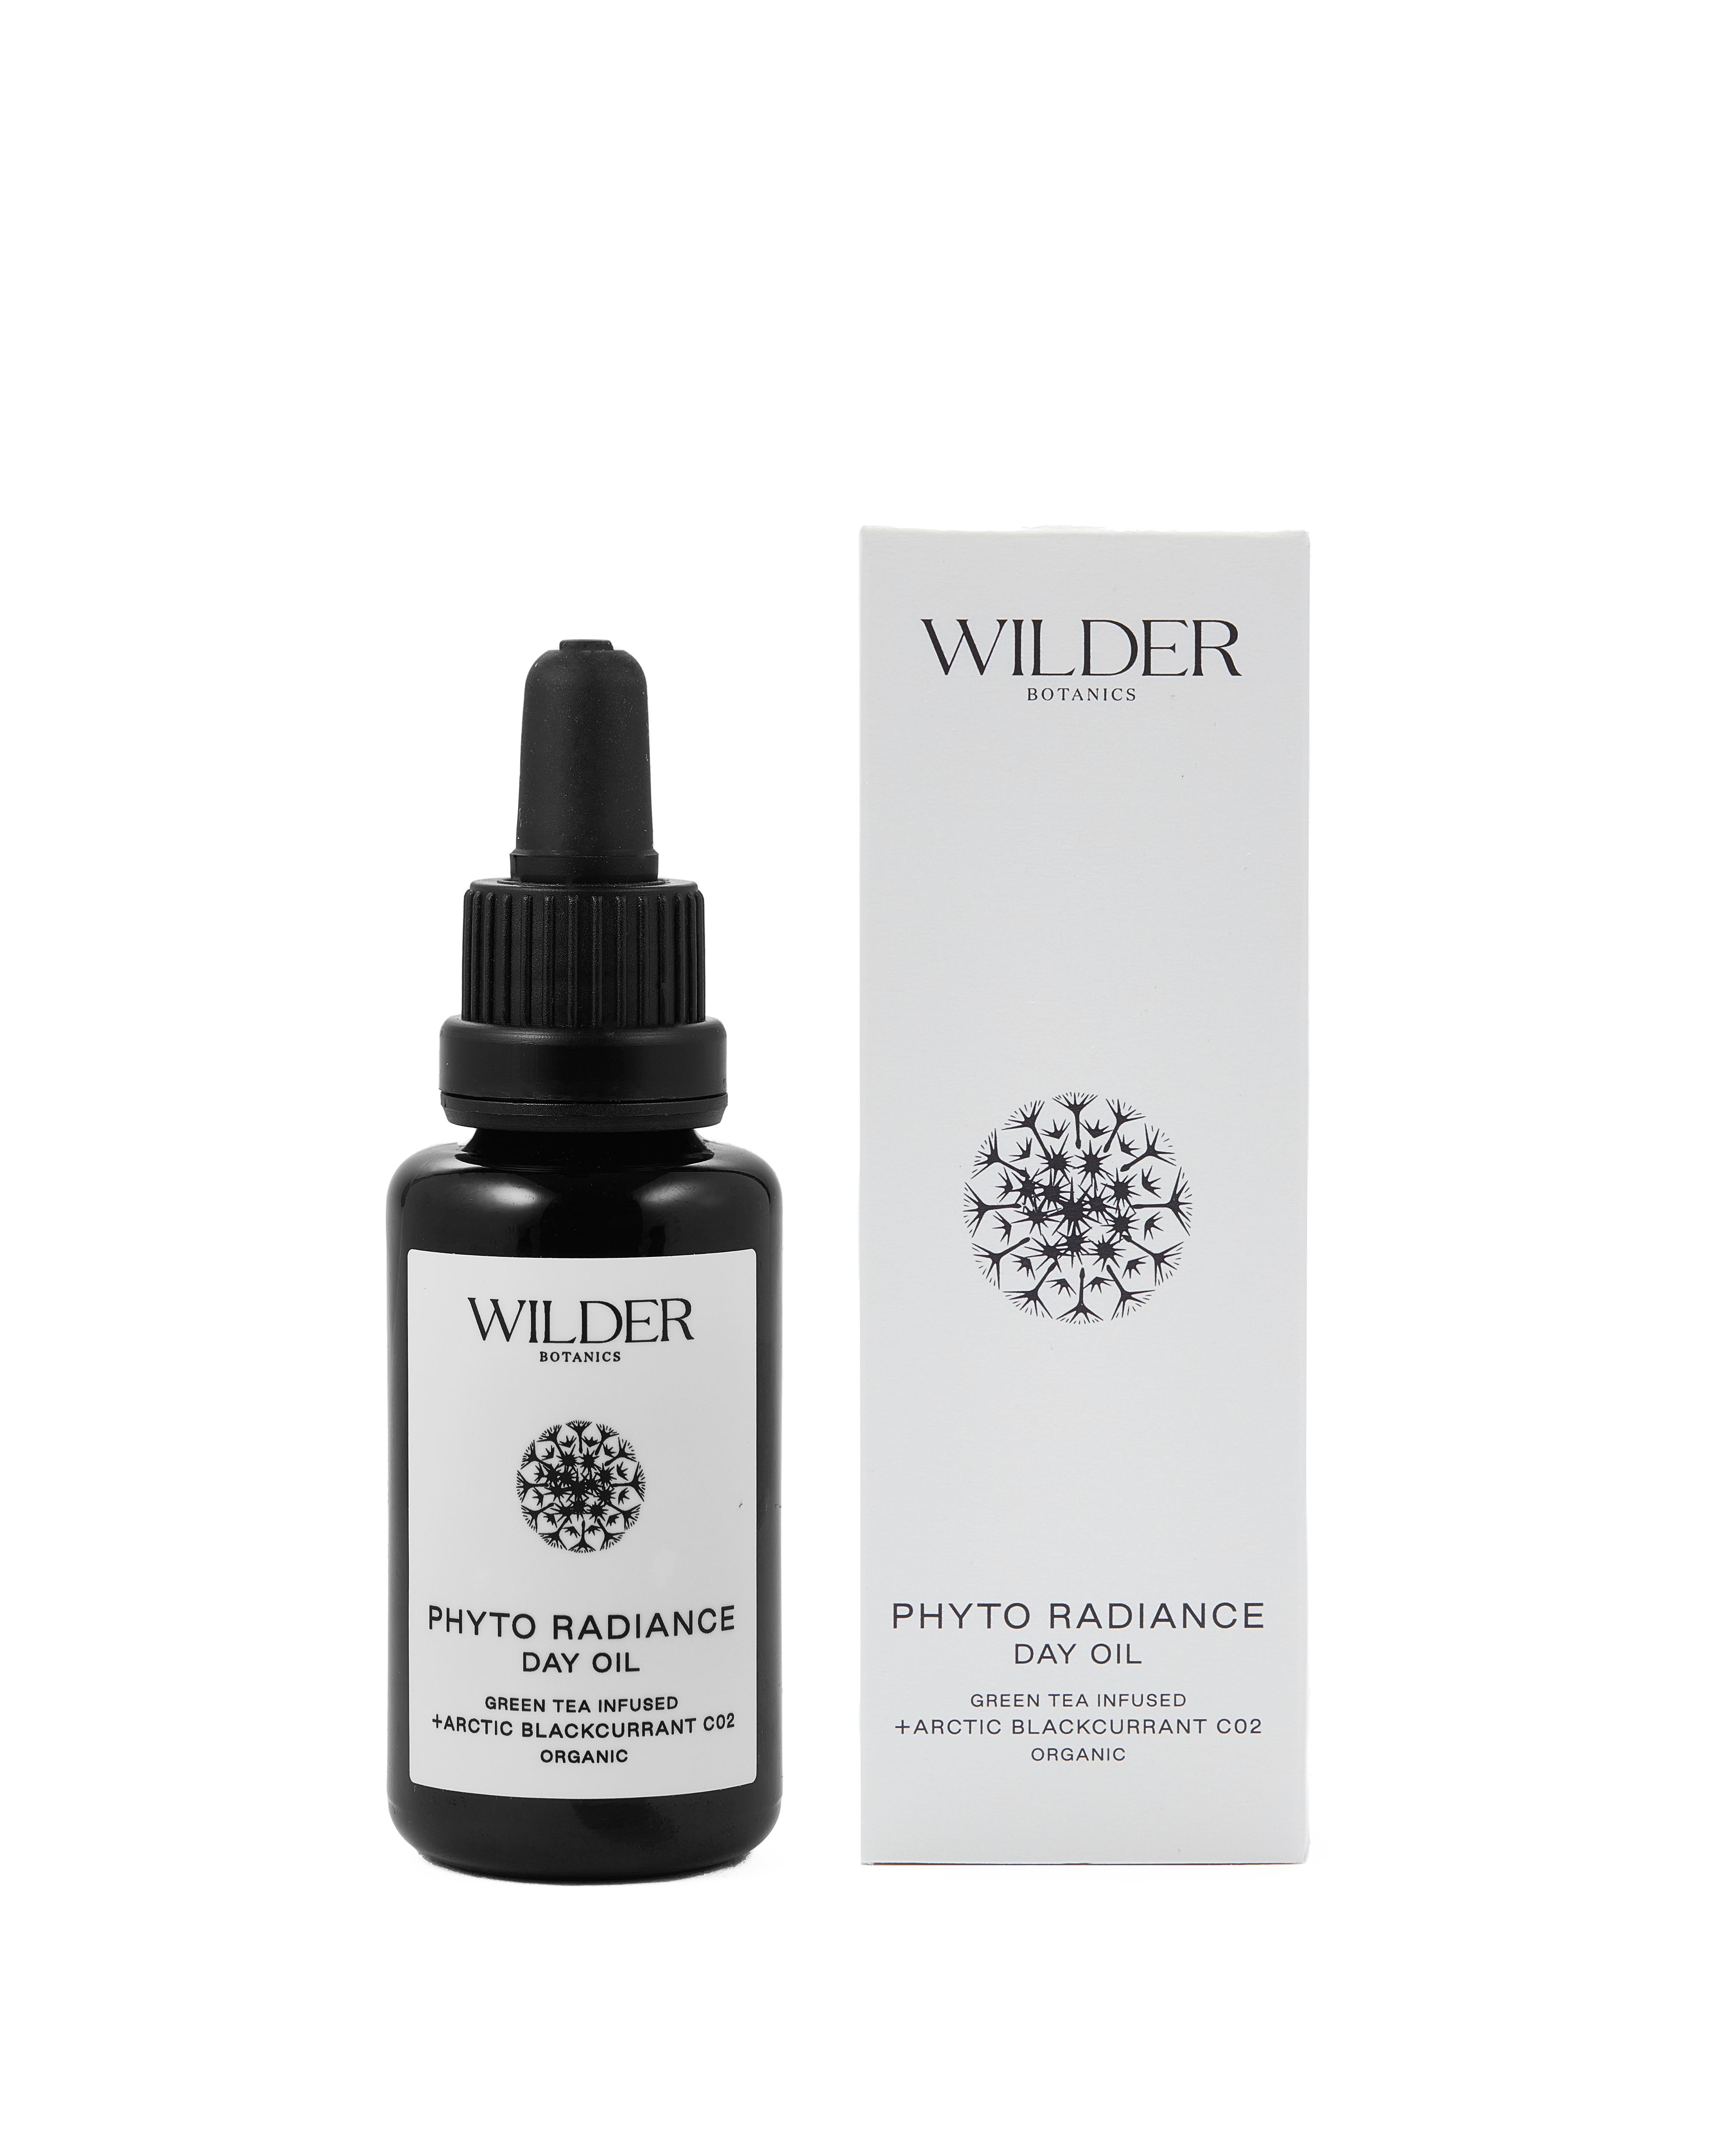 Wilder Botanics Day Oil - Green Tea infused oil with Arctic Blackcurrant C02. rich in beta carotene, vitamins B, C, D & K and is high in protective antioxidants which naturally firms tired looking skin, brightens and balances all skin types for all day hydration. 2